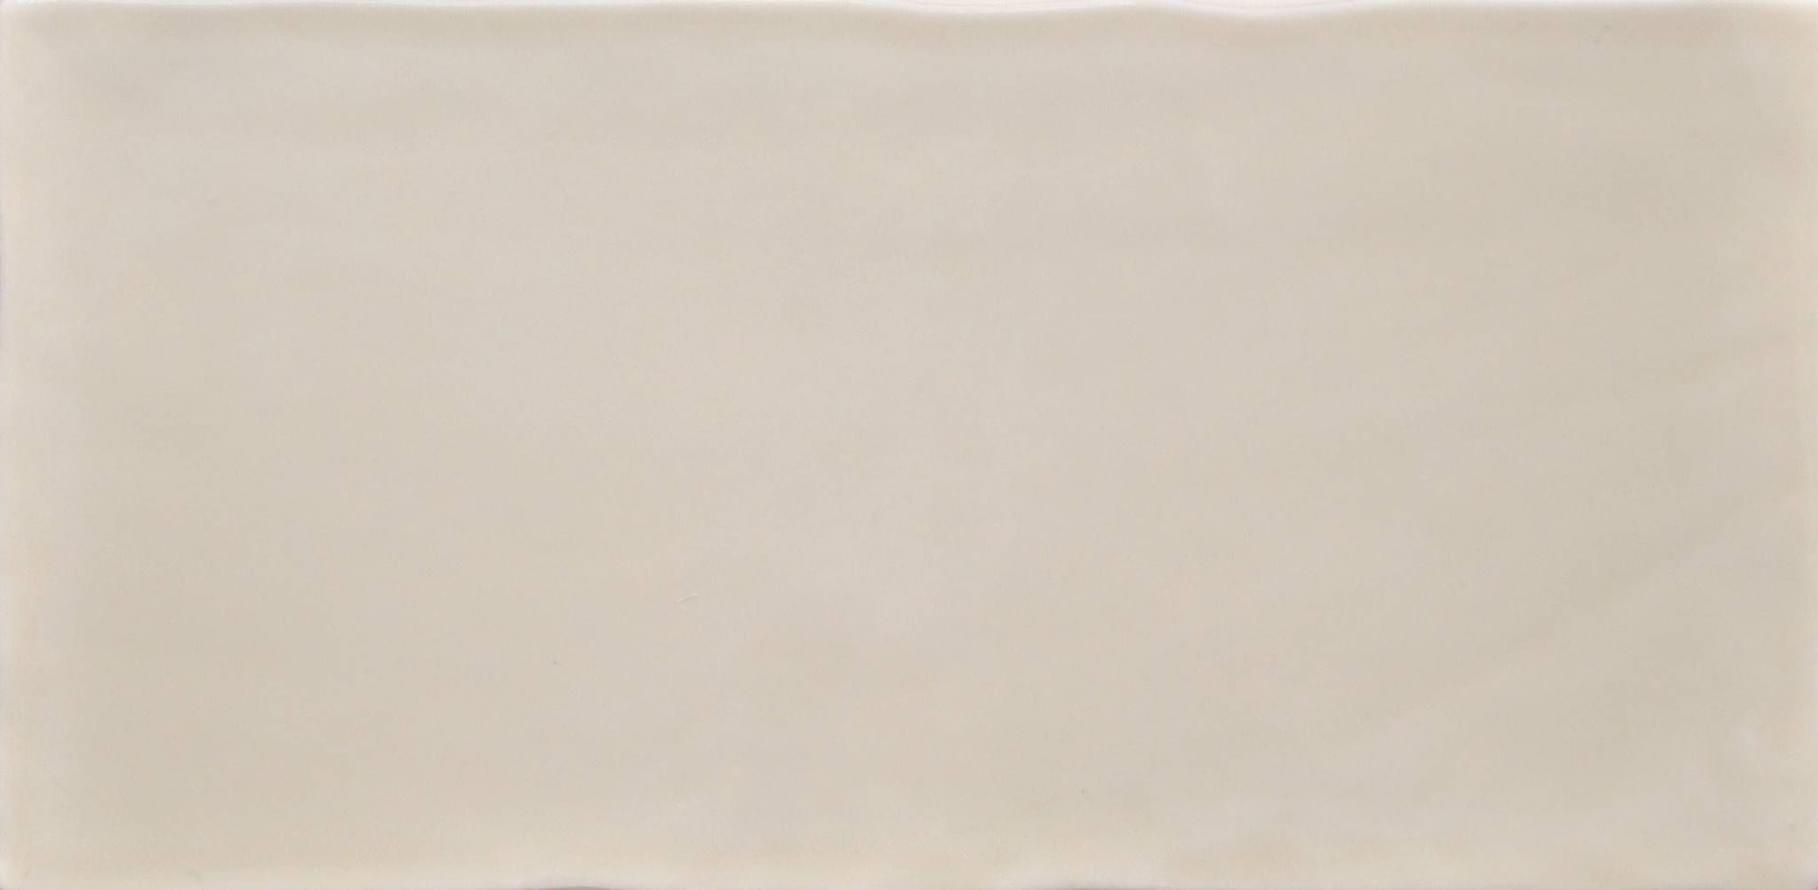 Cifre Atmosphere Ivory 12.5x25